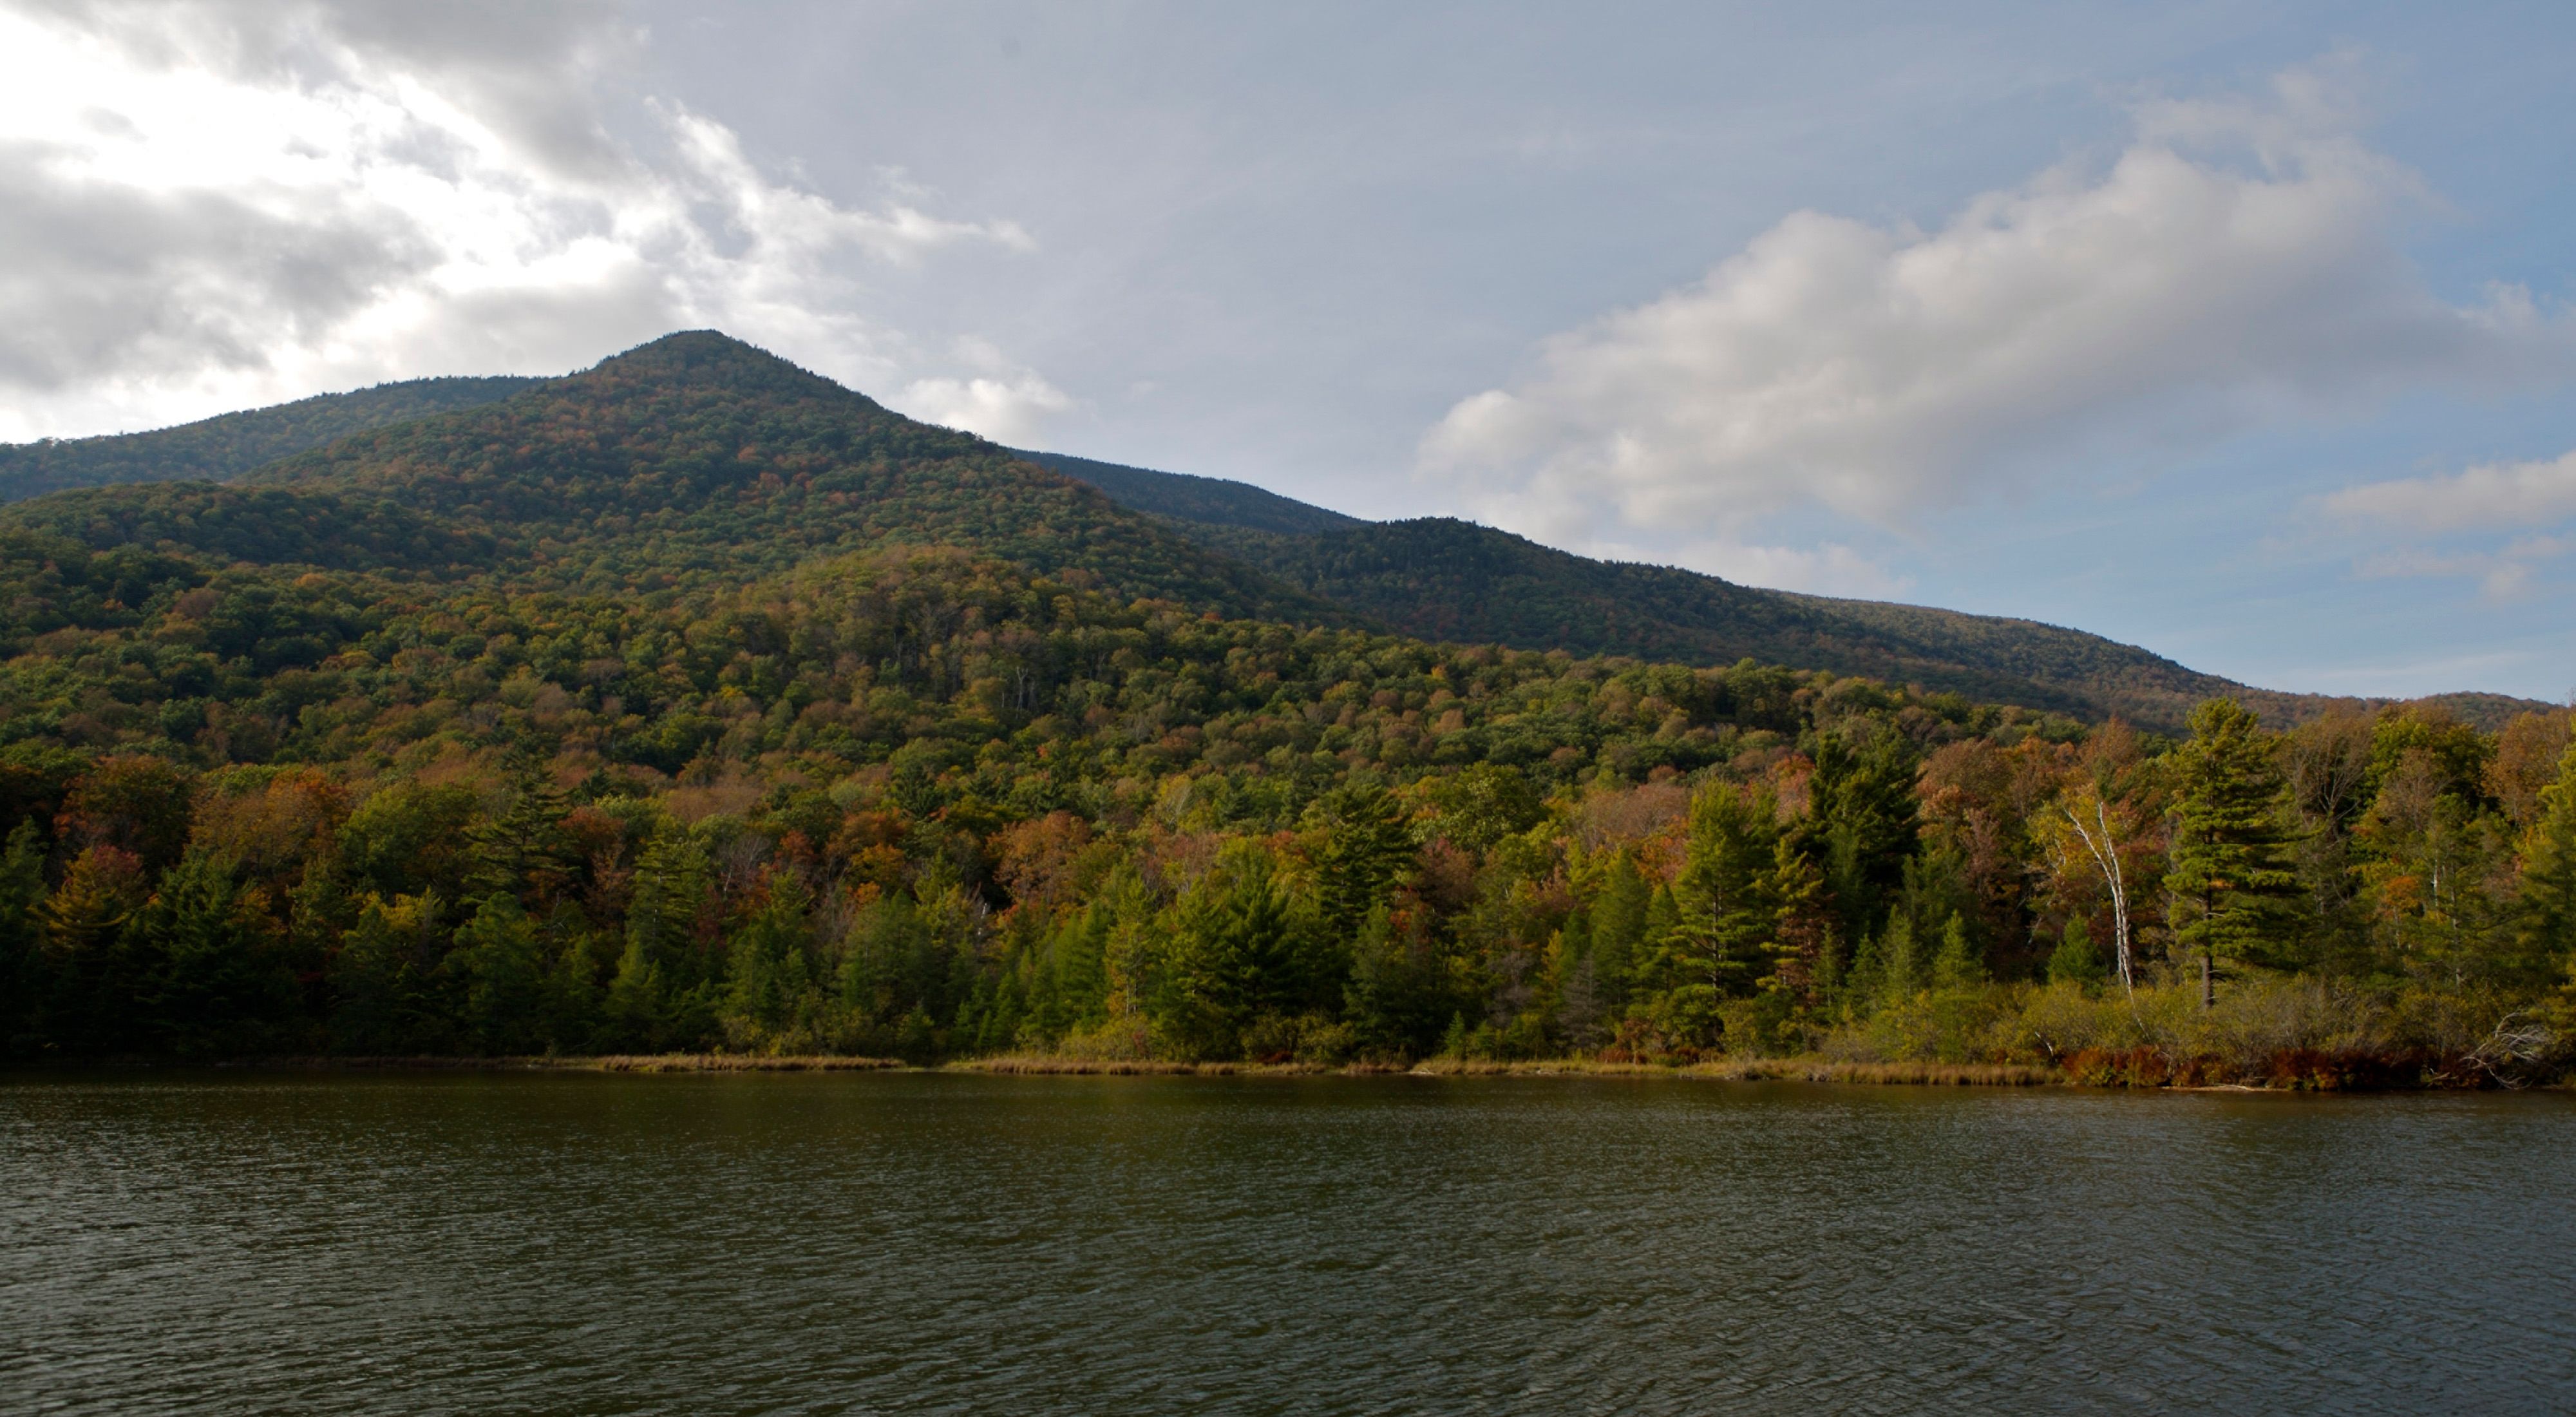 A lakeshore and sloping hillside covered in trees showing fall colors.